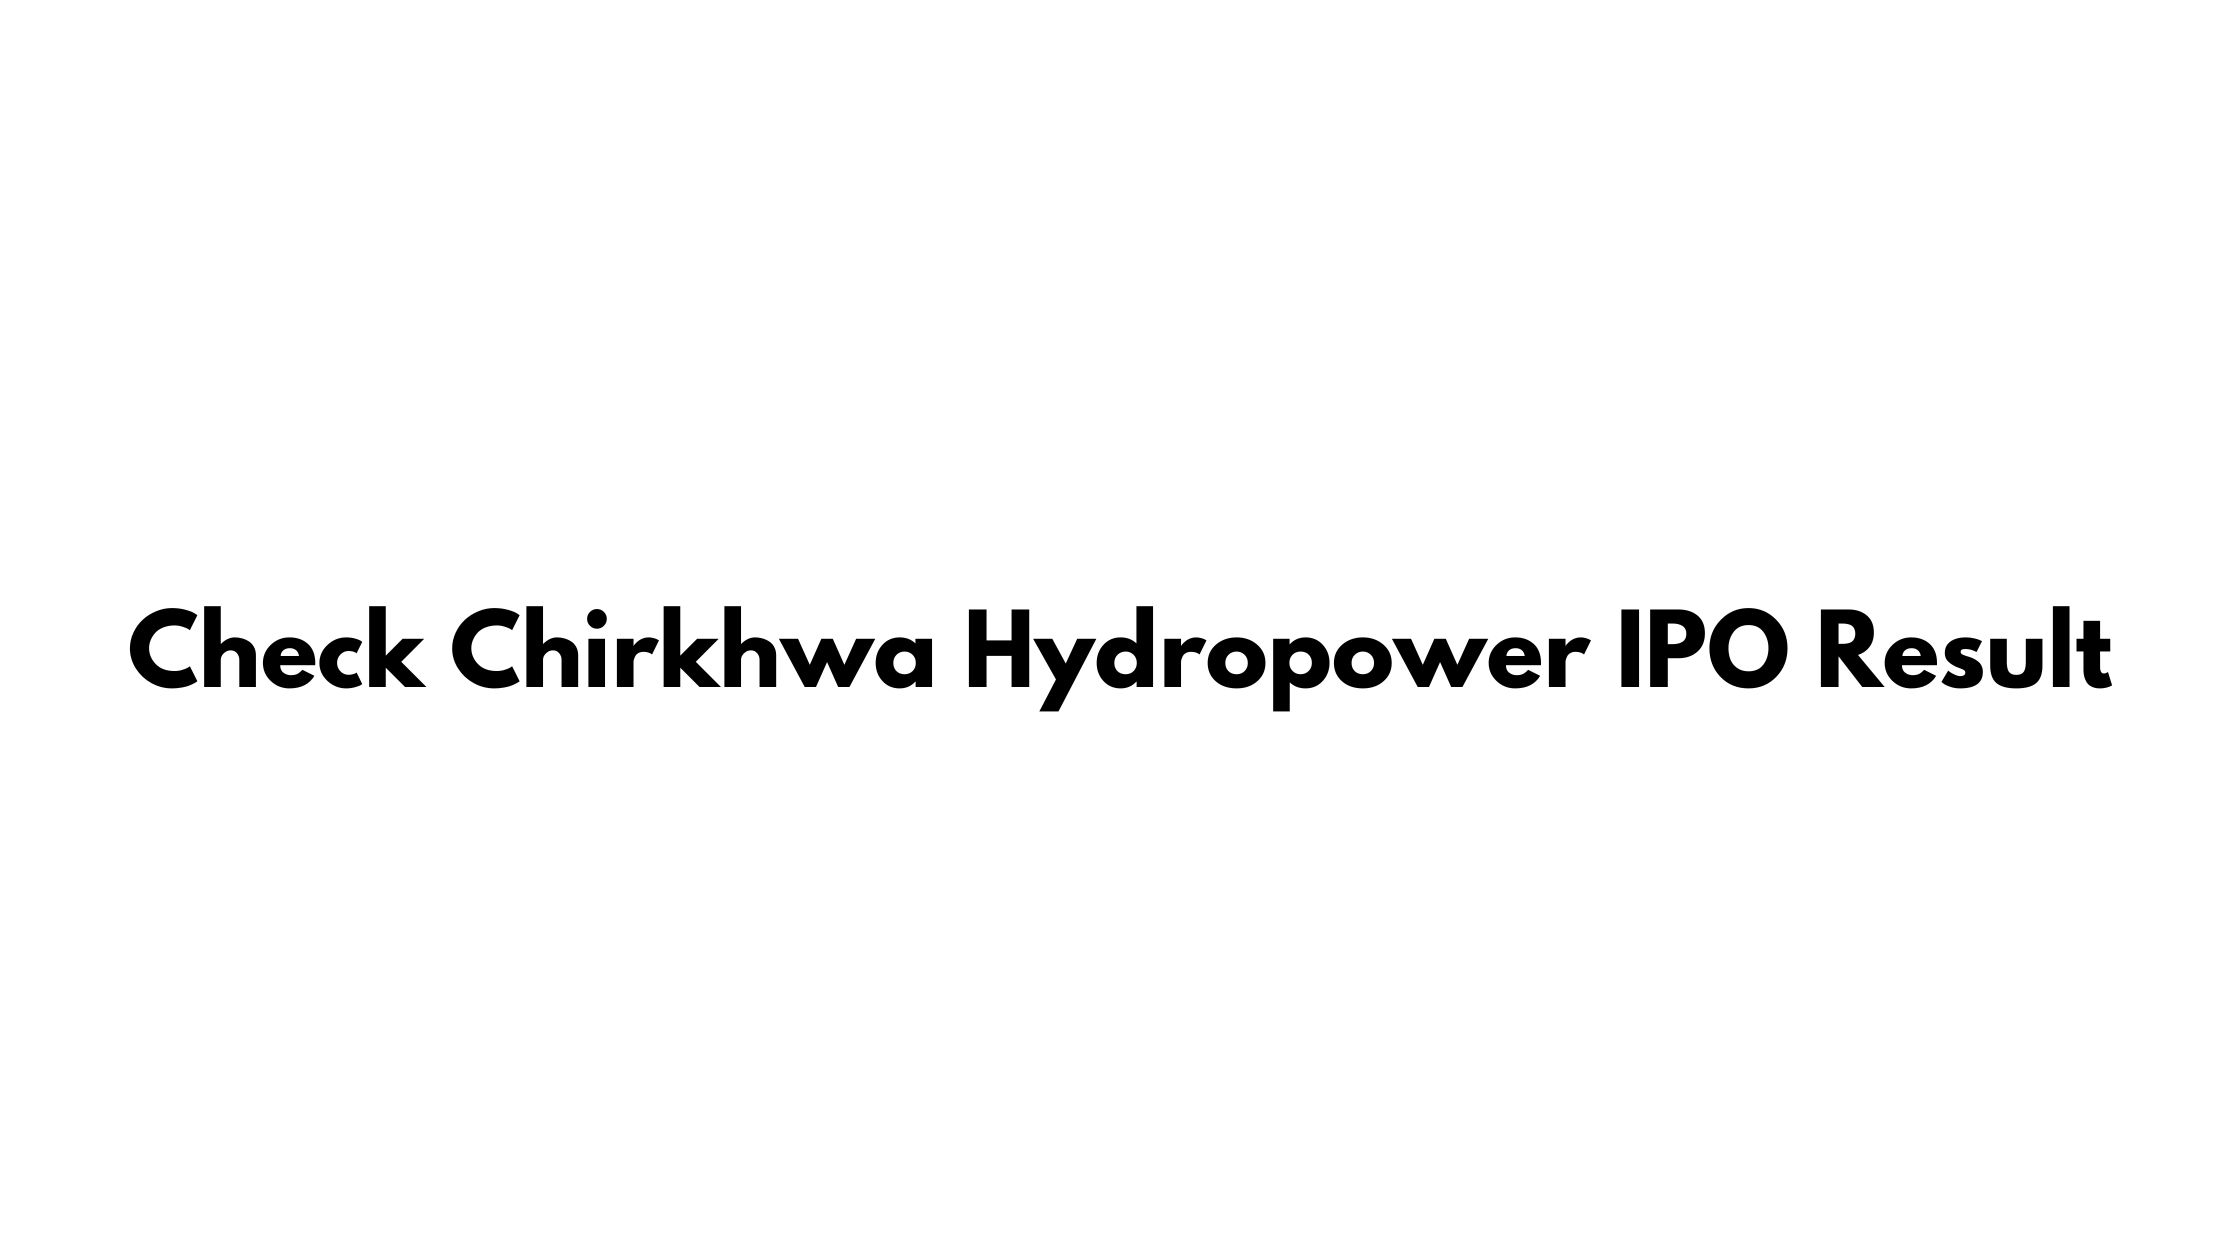 Check Chirkhwa Hydropower IPO Result (Meroshare, CDSC, NIC ASIA Capital Limited)